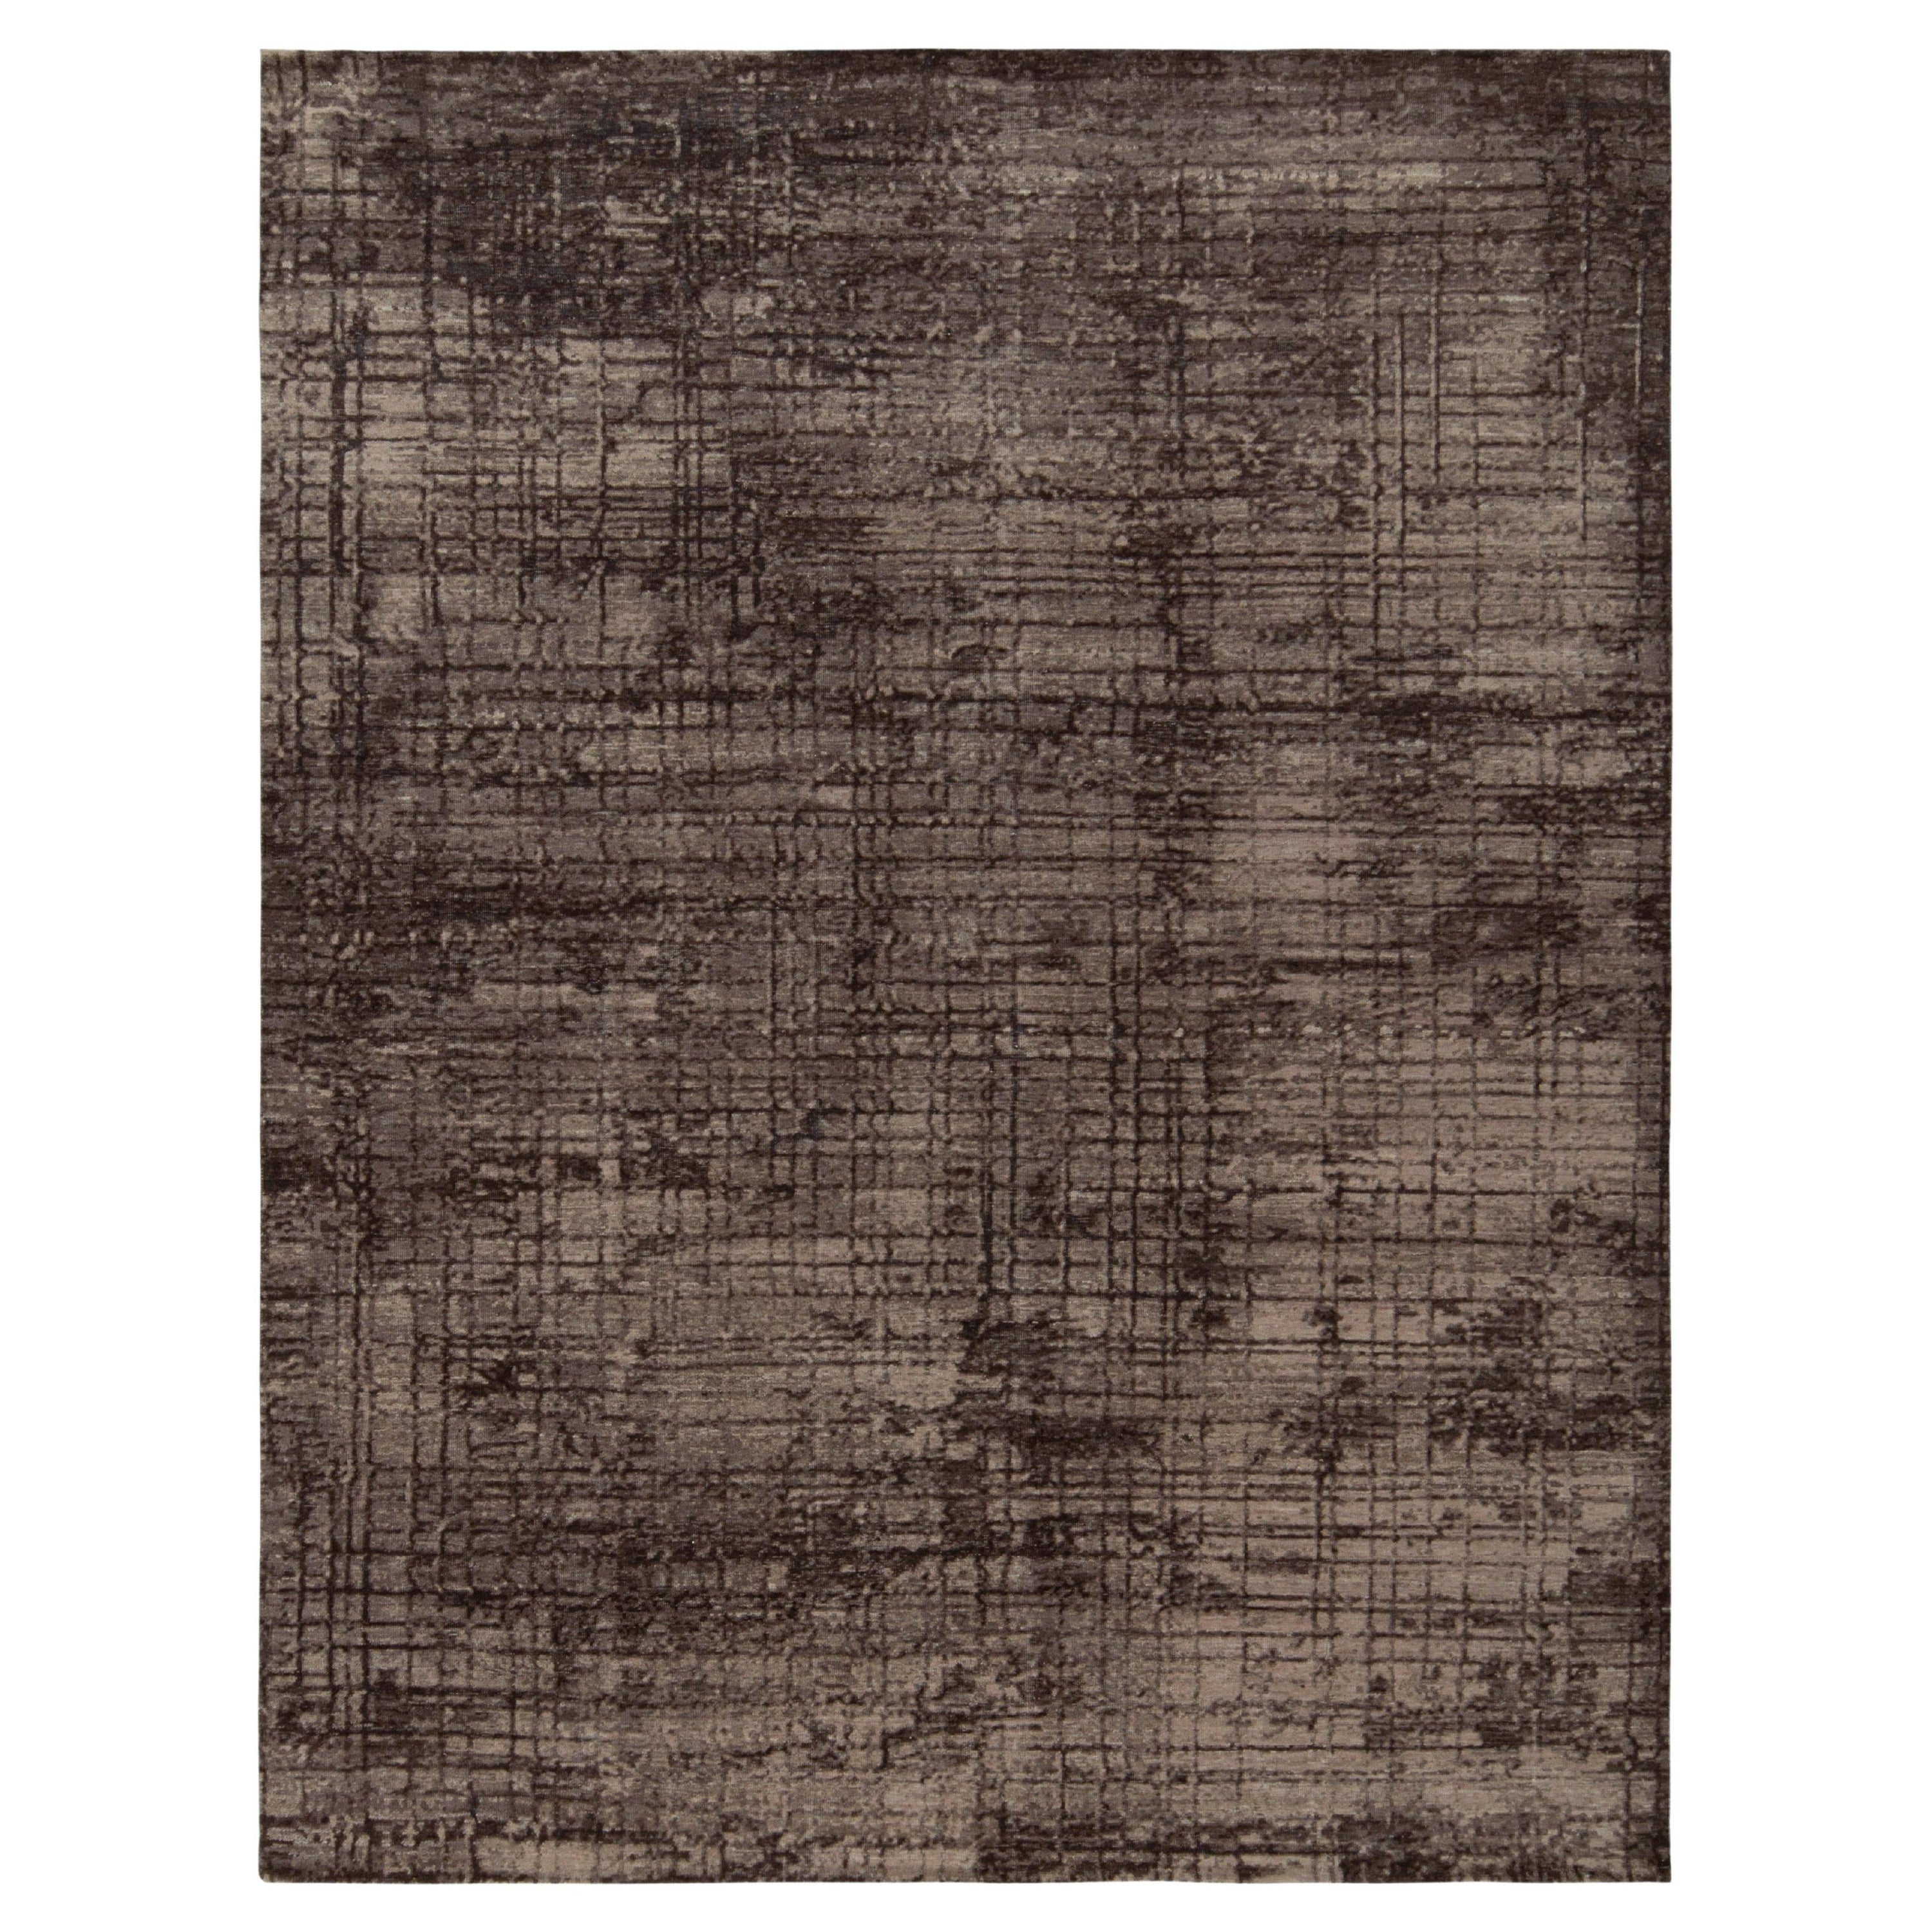 Rug & Kilim's Hand-Knotted Abstract Rug in a Brown, Black Painterly Pattern